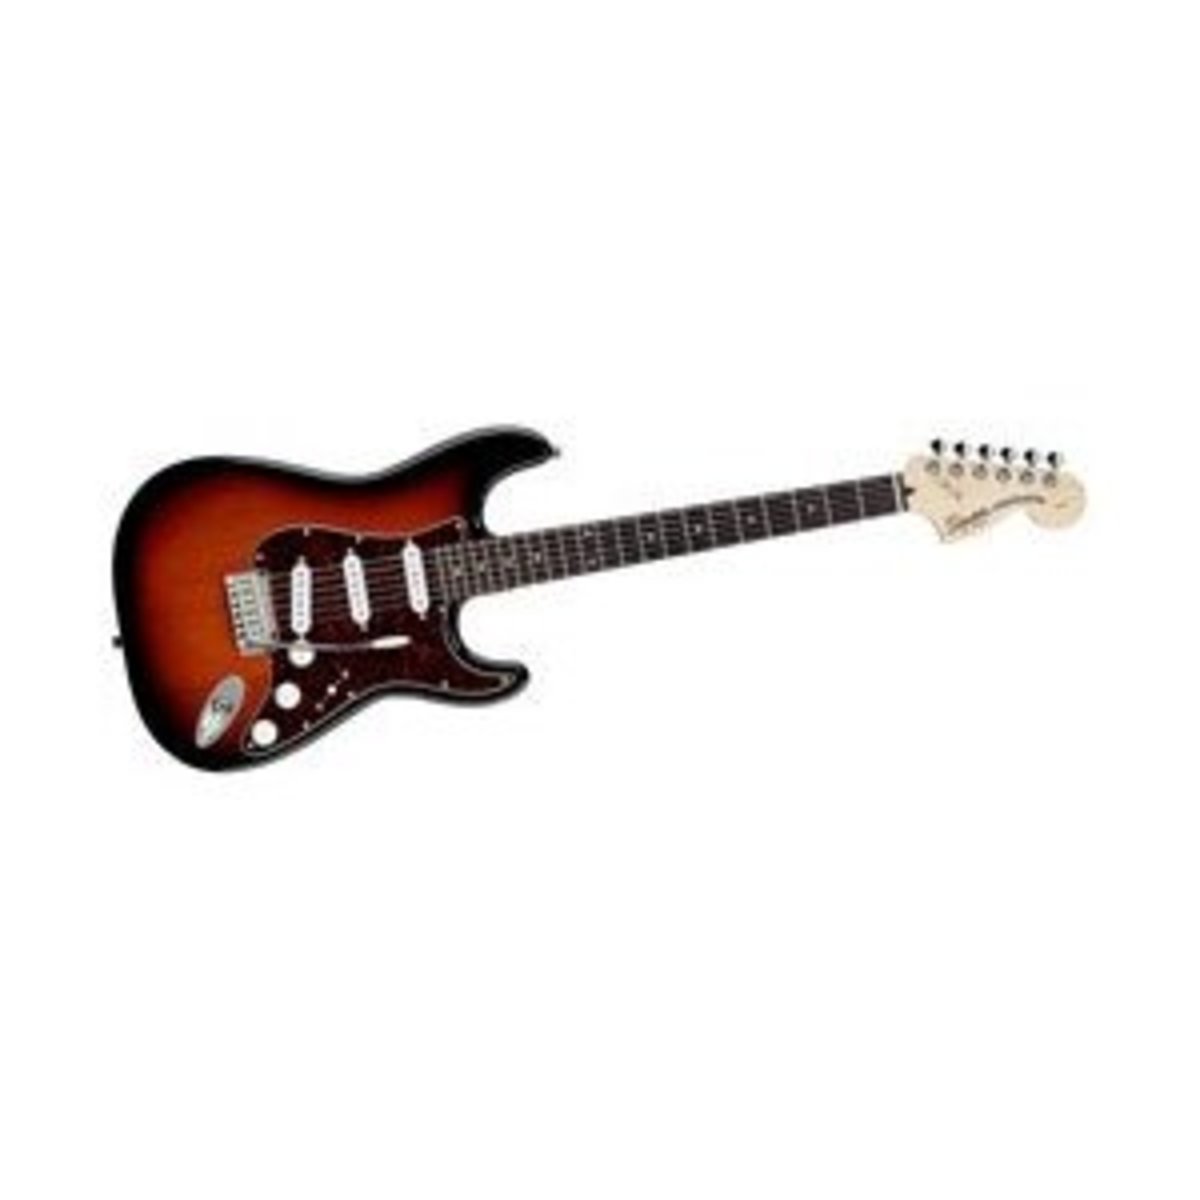 Looks like Stevie Ray Vaughn's guitar.  It's the closest you'll get to it in the price range.